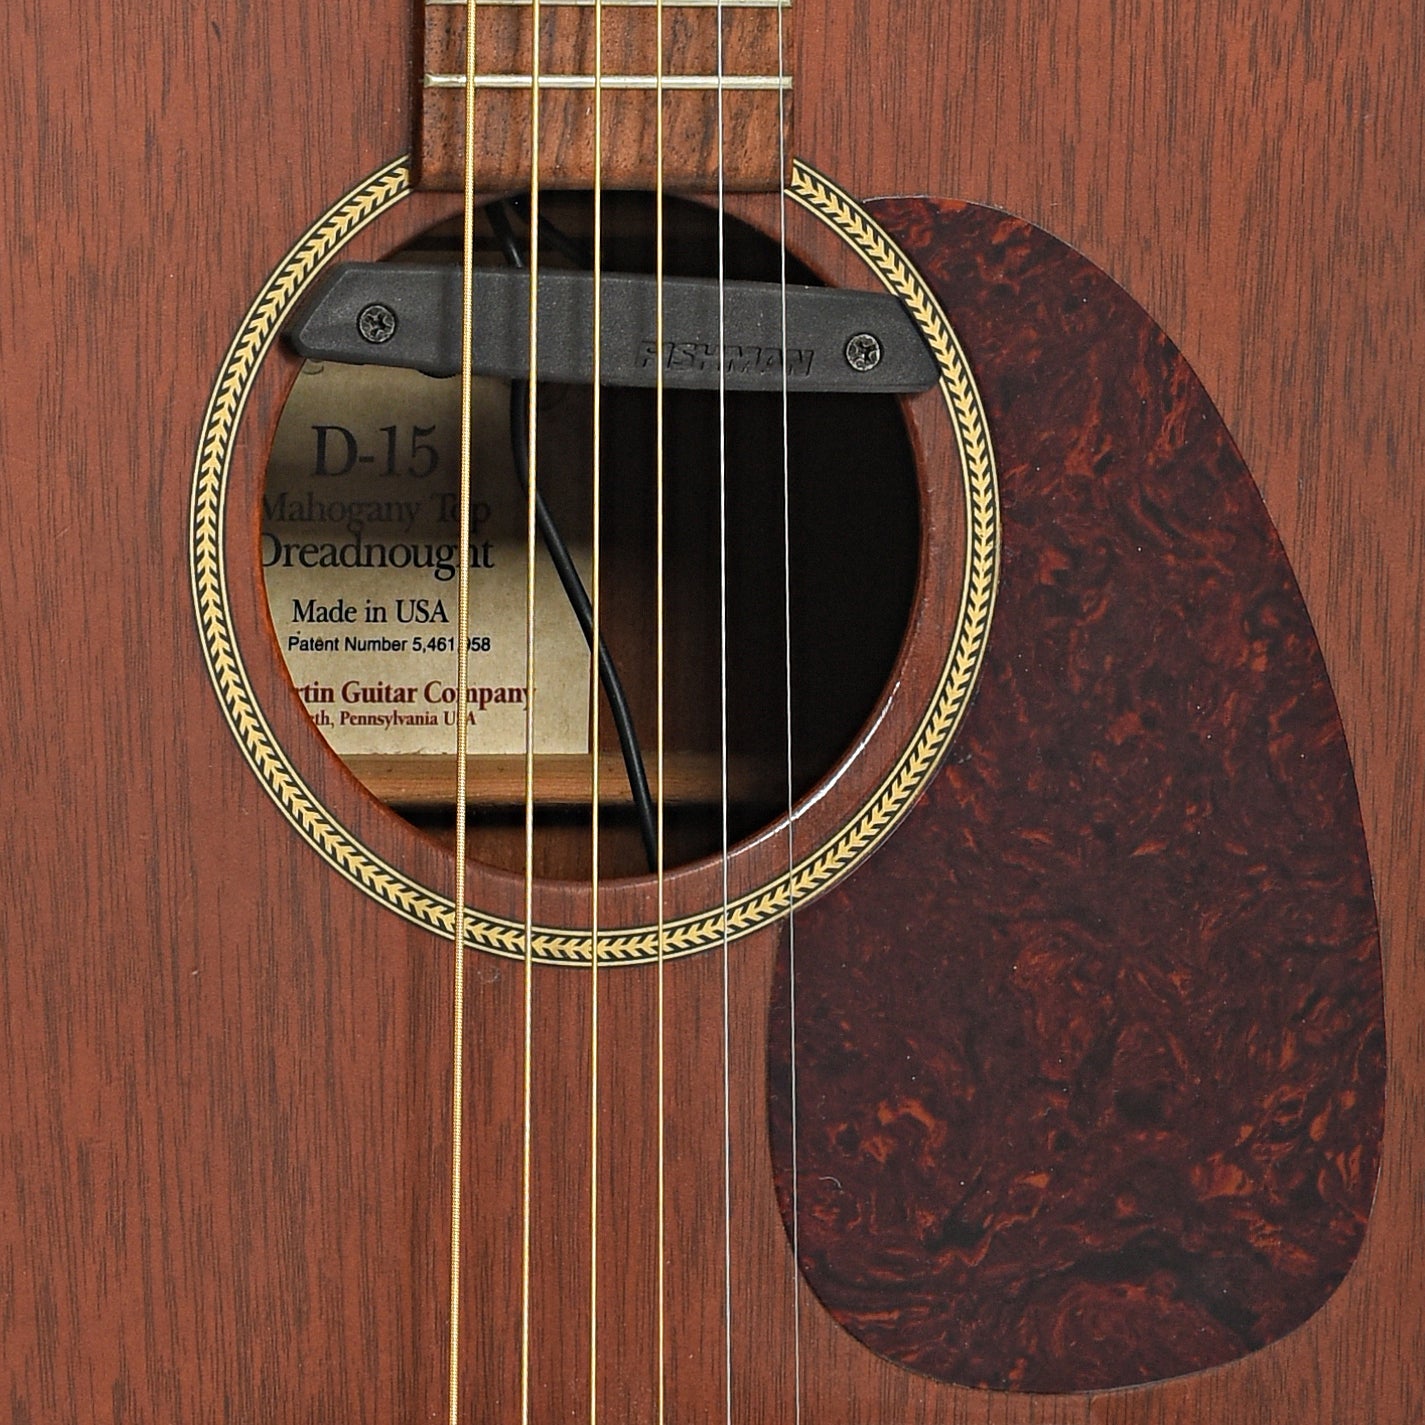 Soundhole and pickup of Martin D-15 Mahogany Top Dreadnought Acoustic Guitar (1998)